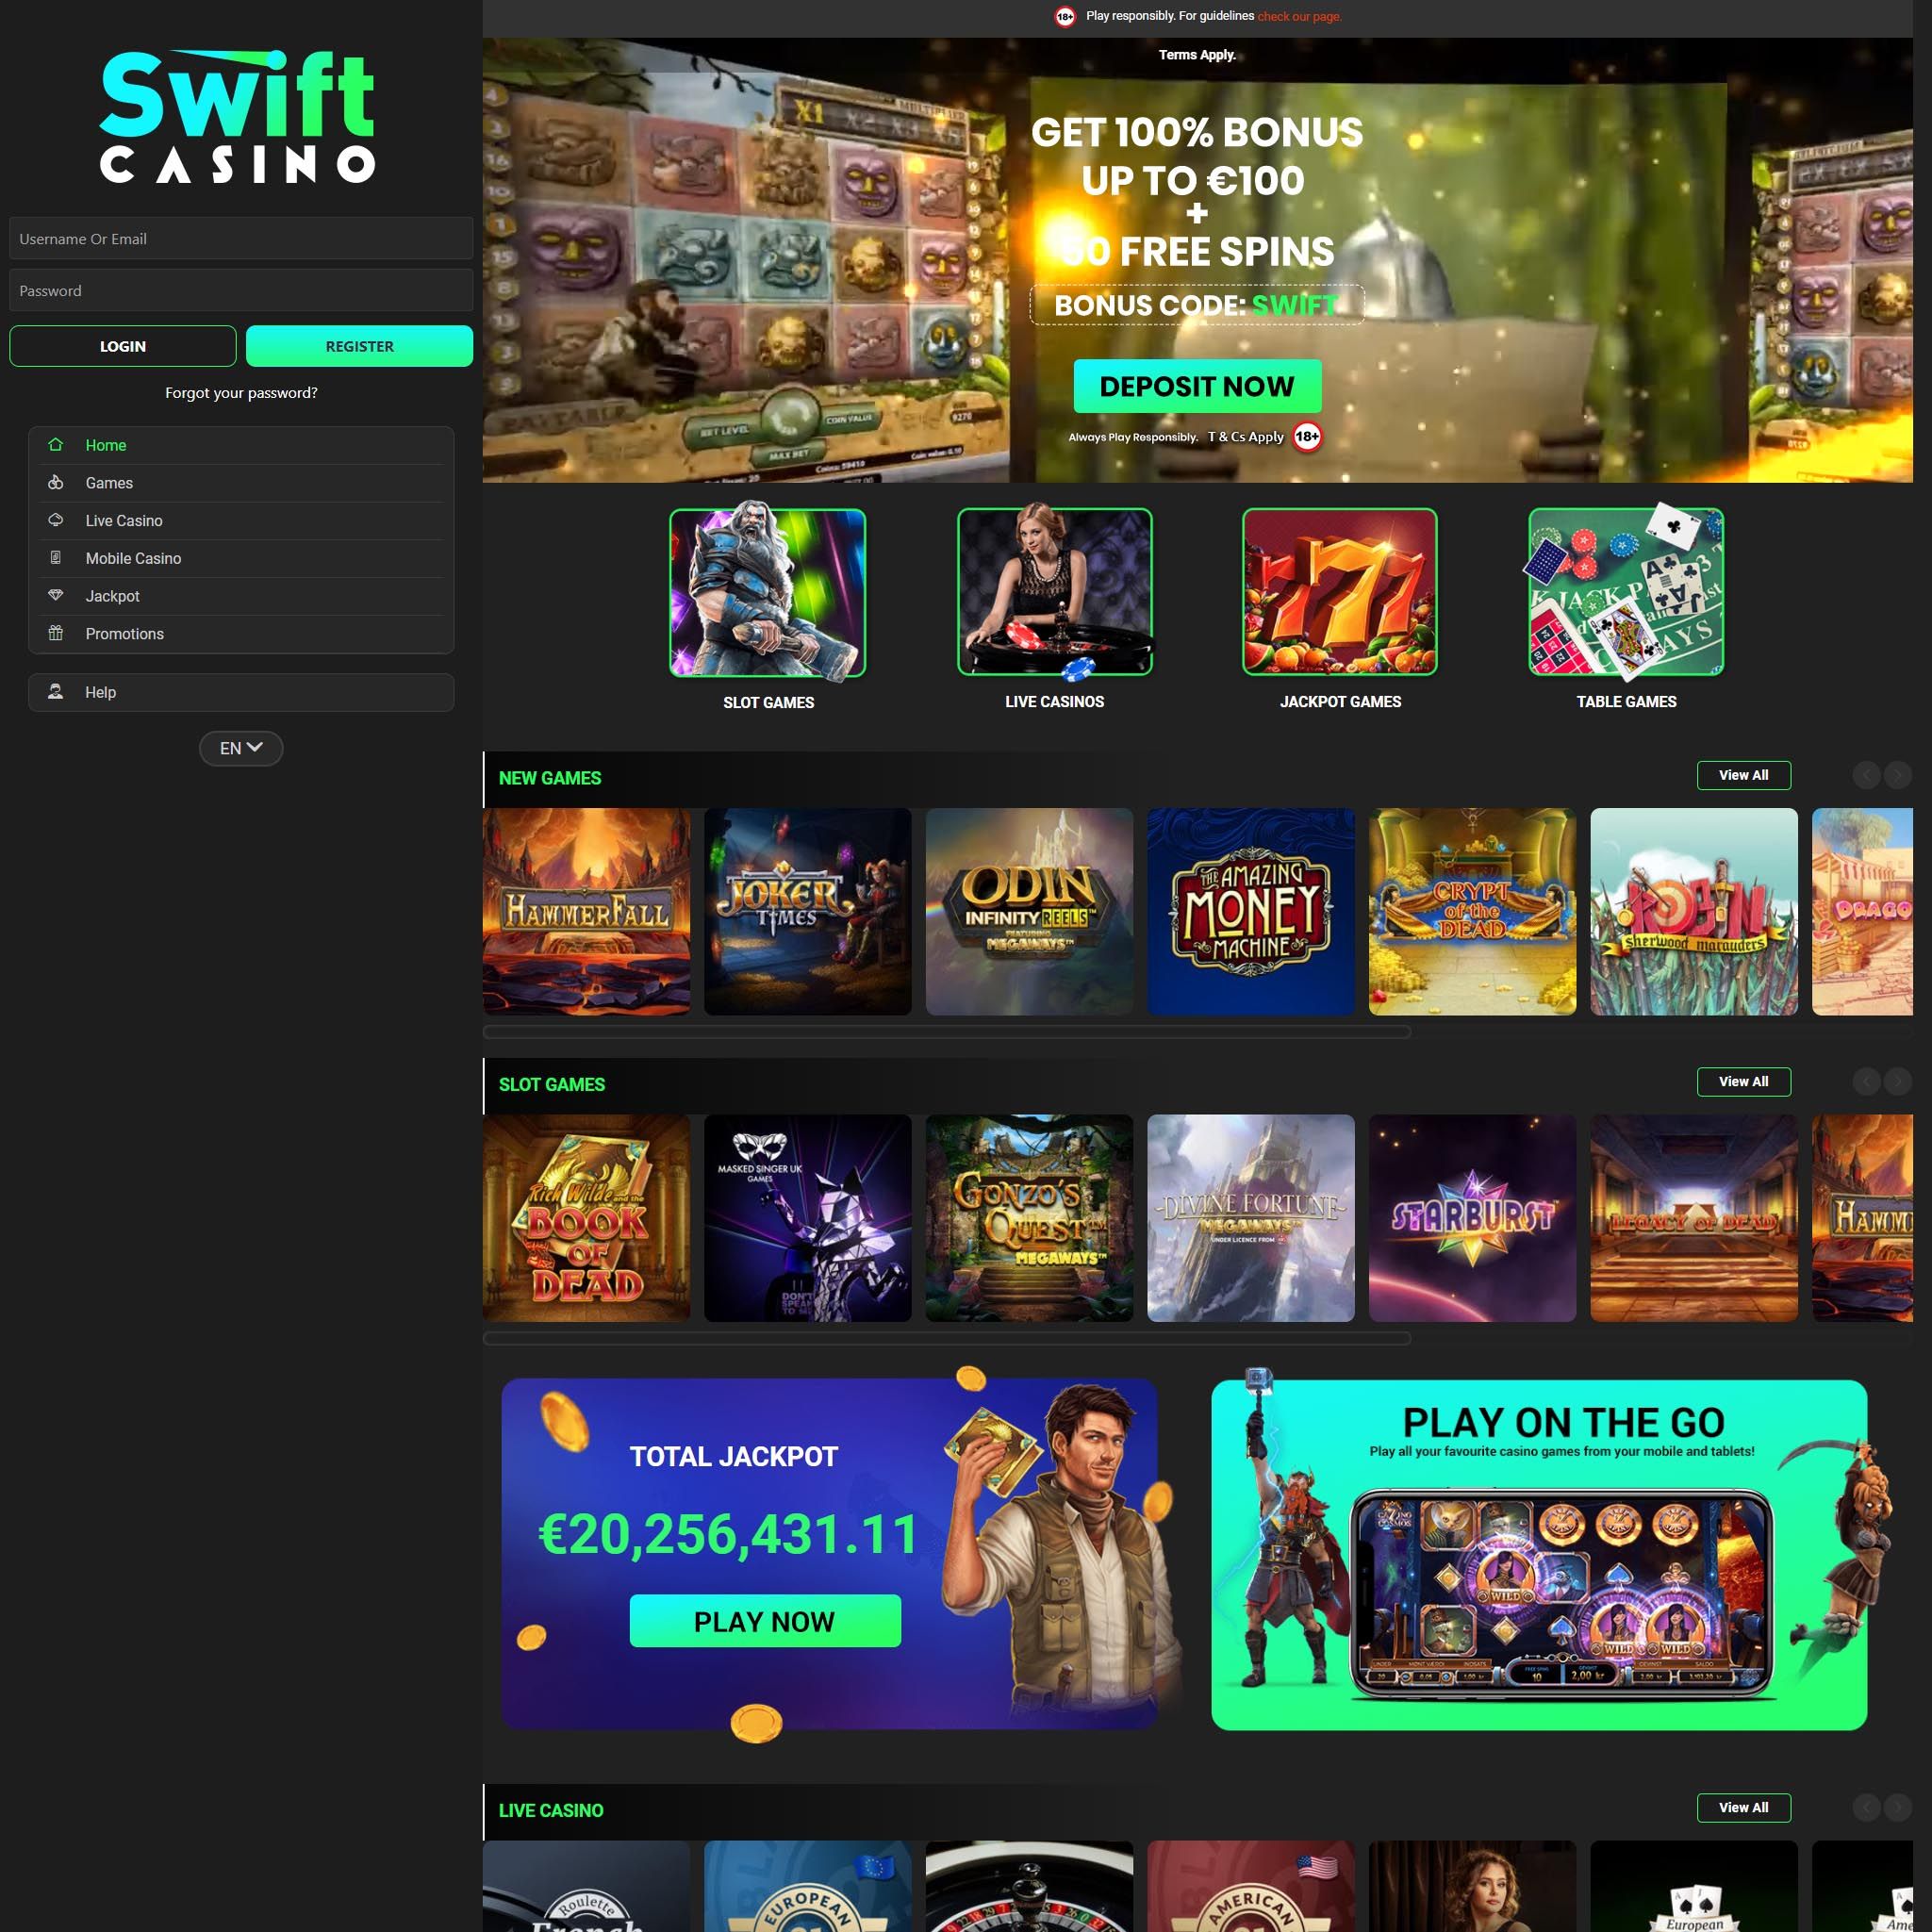 Swift Casino review by Mr. Gamble